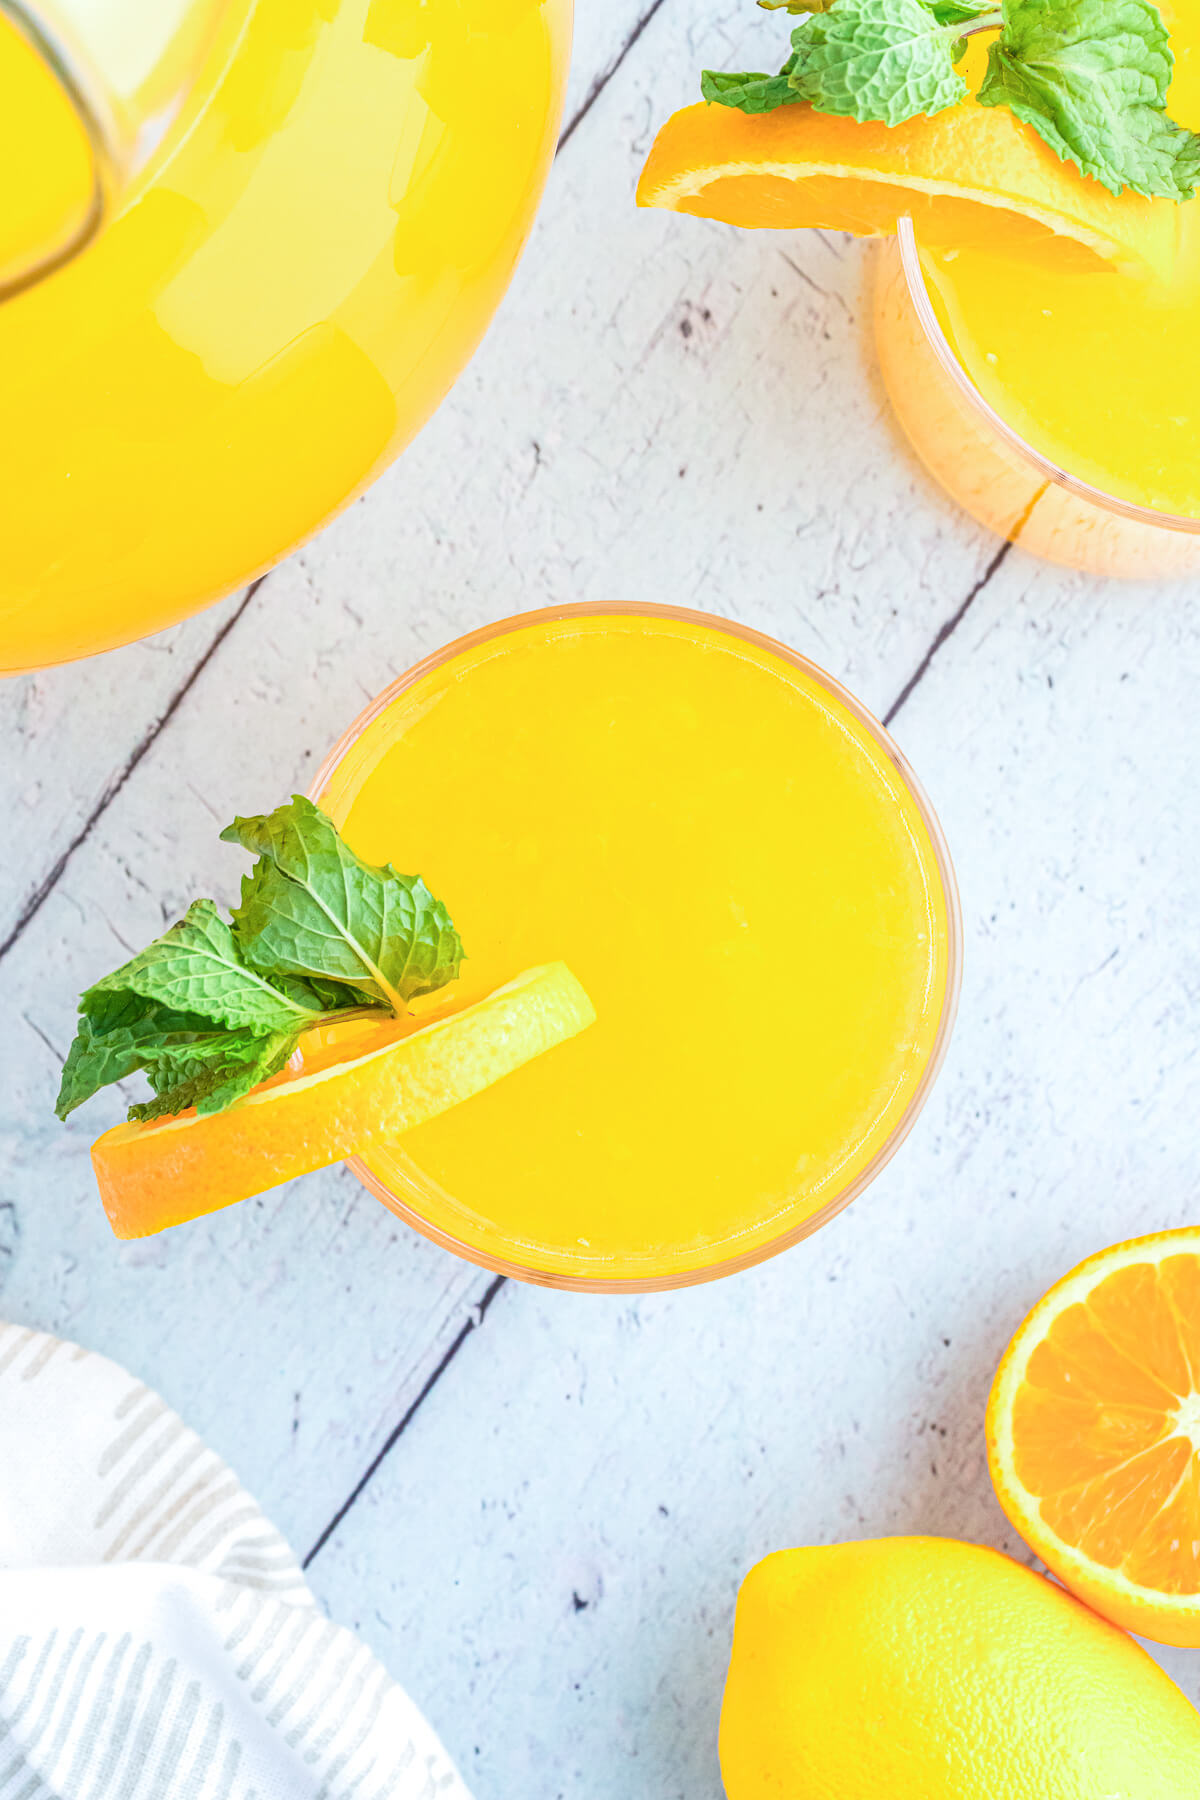 A glass of bright homemade orangeade garnished with orange wheels and green sprigs of fresh mint.